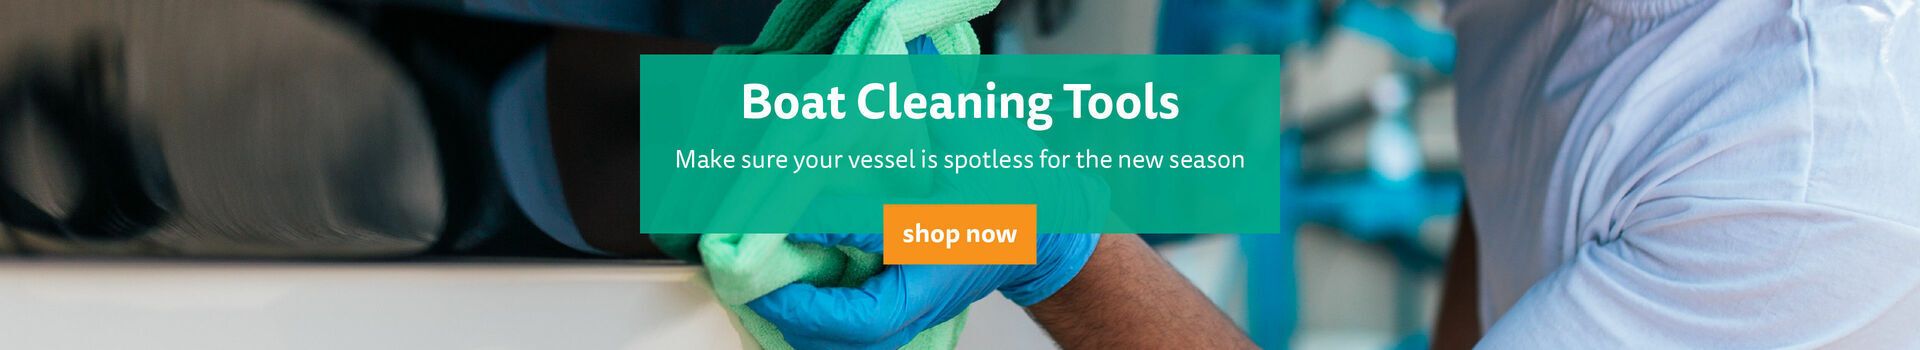 Shop Our Boat Cleaning Tools